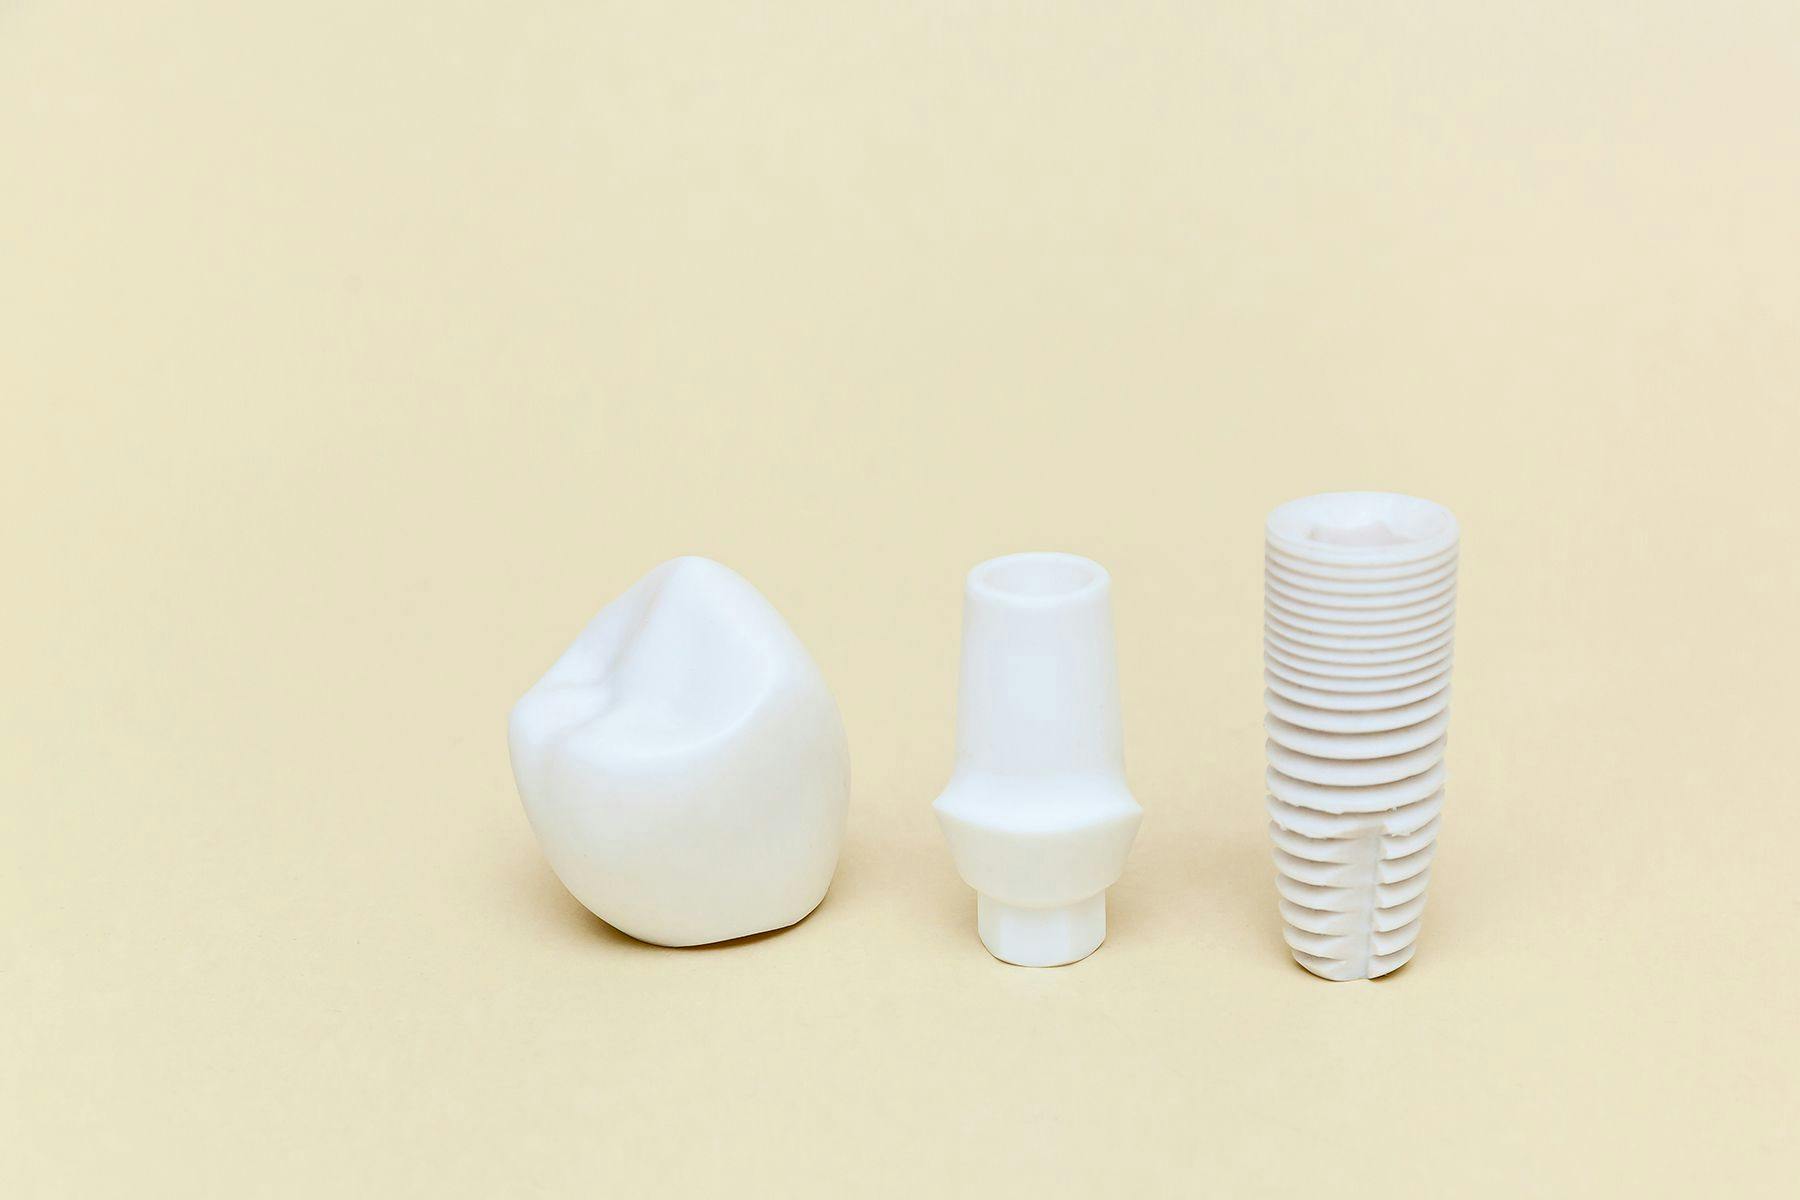 Zirconia Implants: What We Know and What We Don’t: © Oleg / STOCK.ADOBE.COM